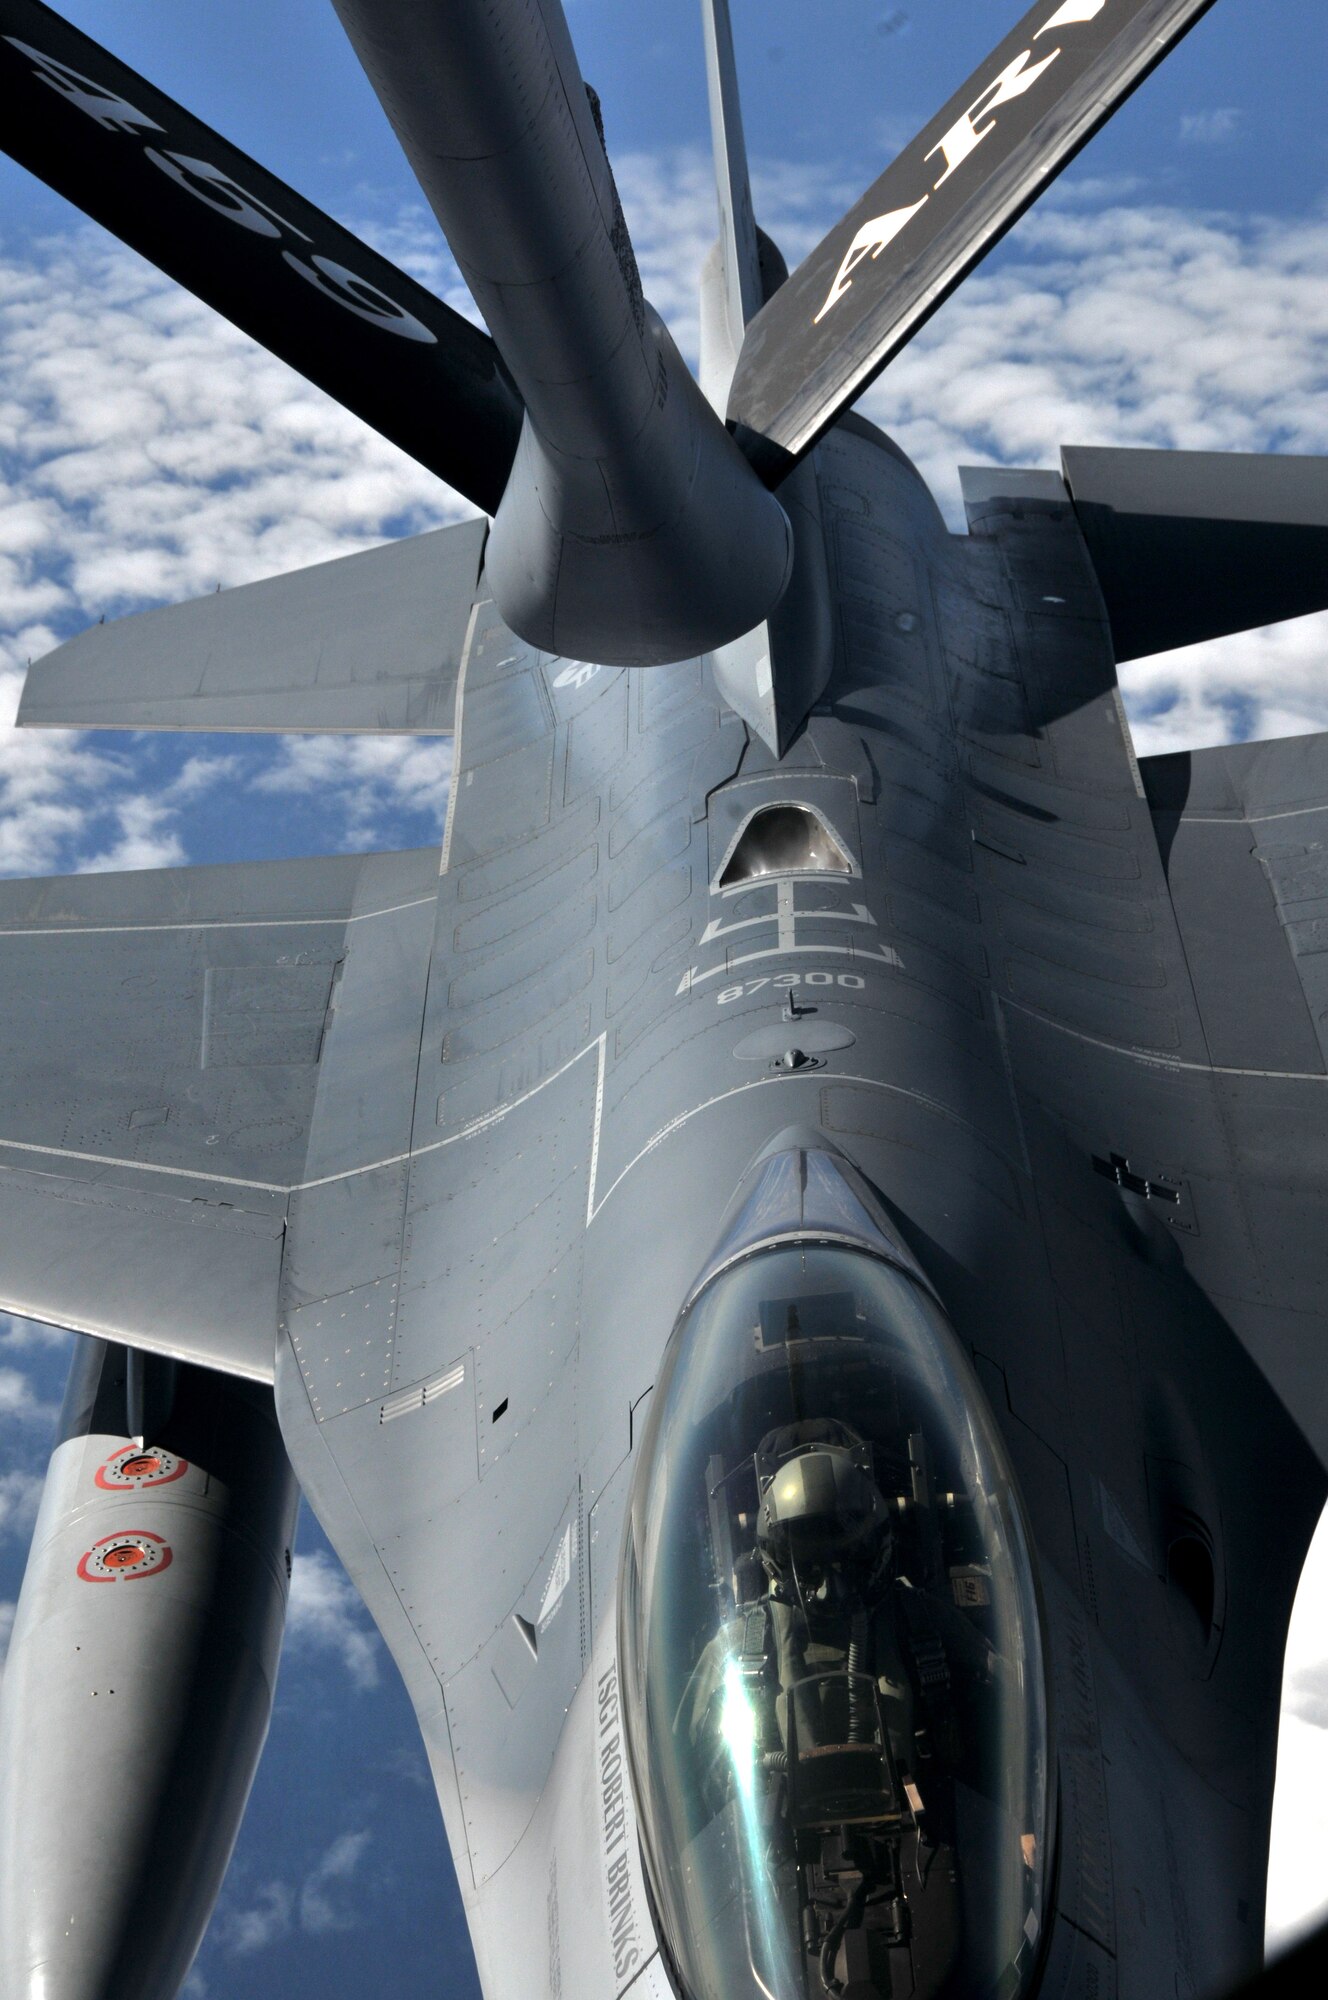 An F-16 from the 115th Fighter Wing, Madison, Wis., gets refueled from a KC-135 from the 459th Air Refueling Wing, Joint Air Base Andrews, Maryland, as they participate in Operation Northern Viking June 7, 2011, training with approximately 400 US and NATO forces in Iceland focusing mainly on air-space protection.  (U.S. Air Force photo by Senior Airman Ryan Roth)